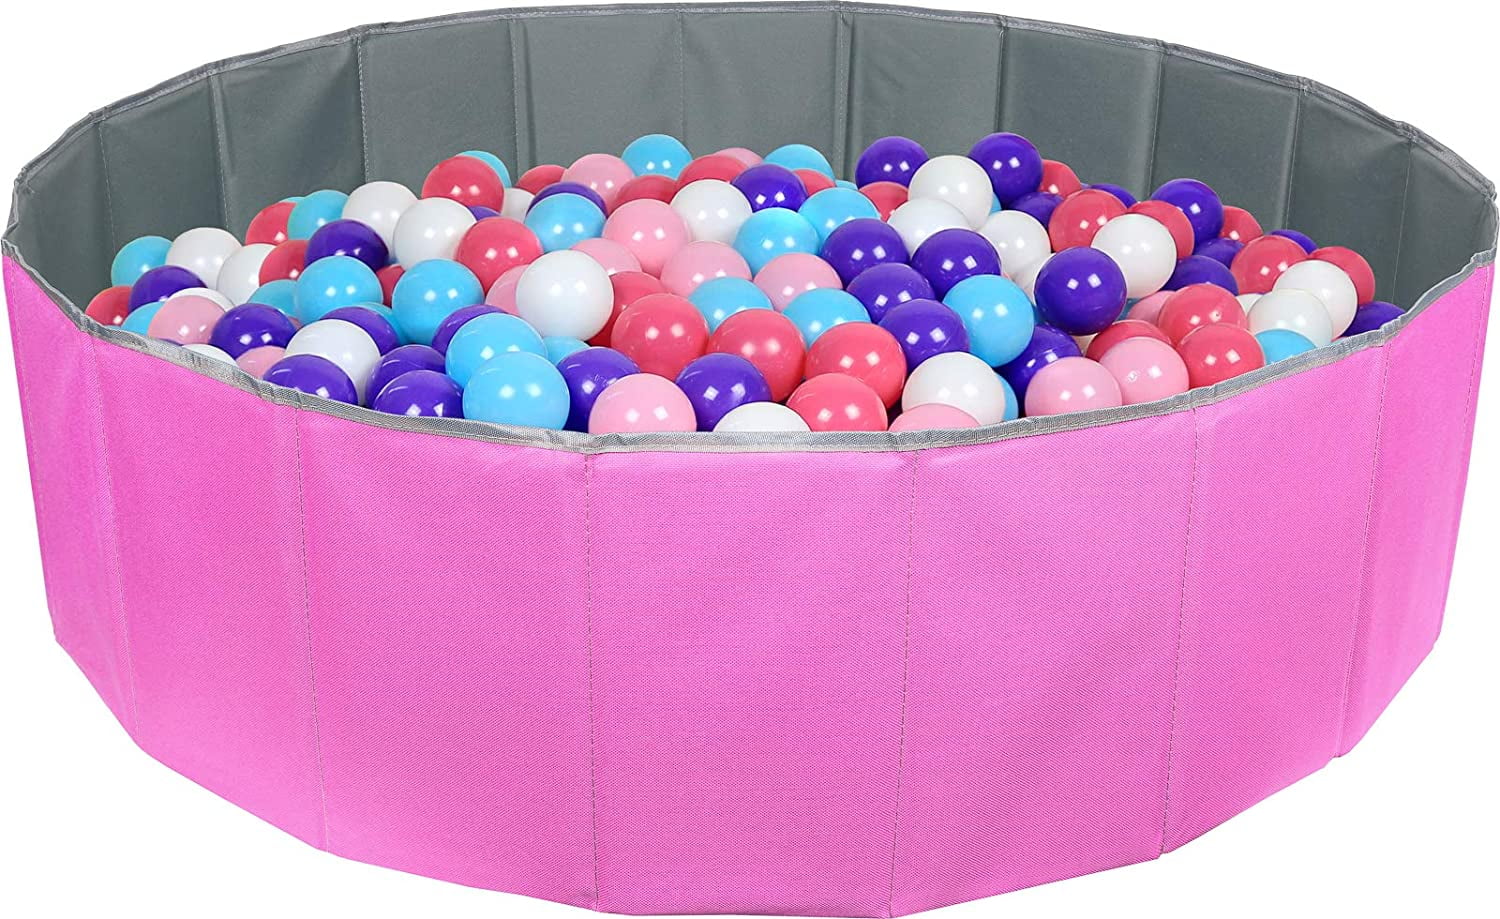 Children Play Ball Pit 300 pcs Kids Dry Soft Paddling Outdoor Pool Great Gift 